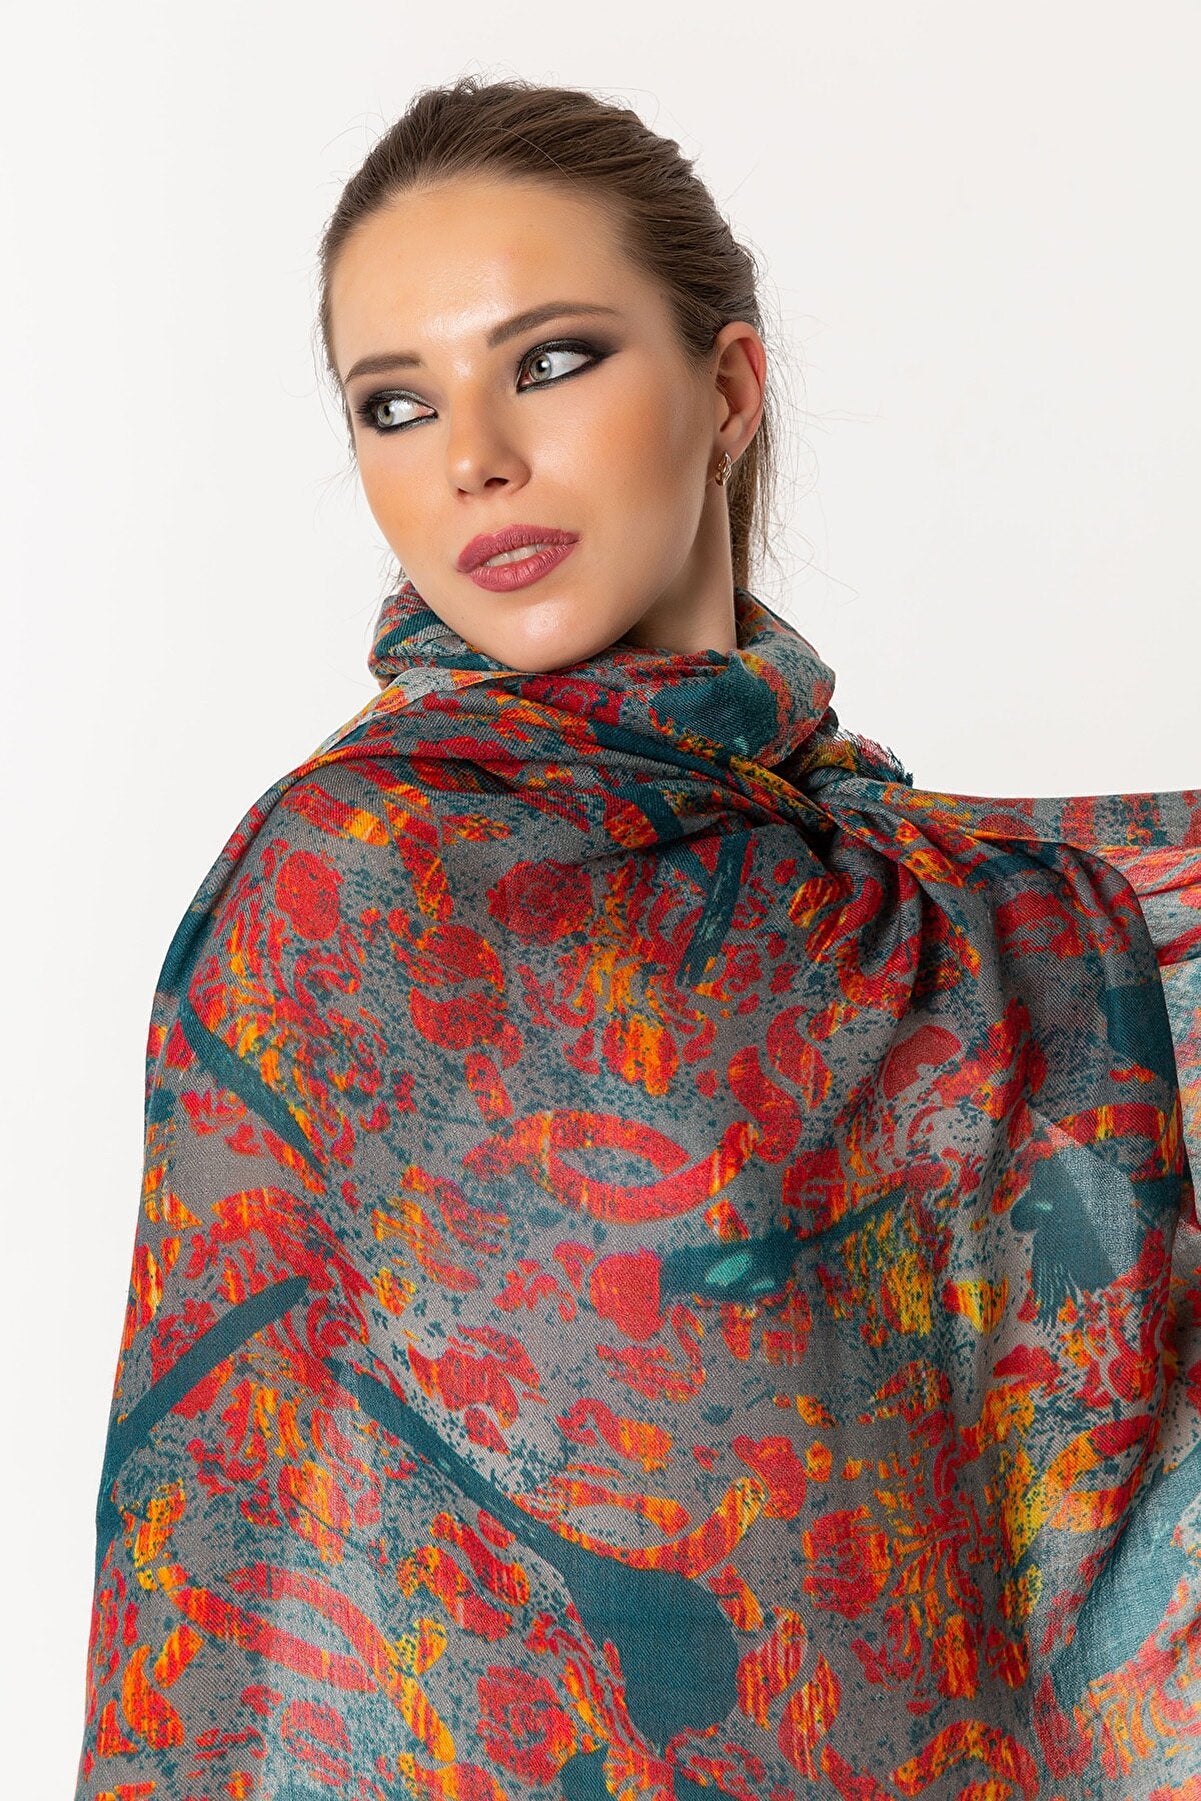 Featherlite Cashmere - Natural Teal with Brick Red Flowers